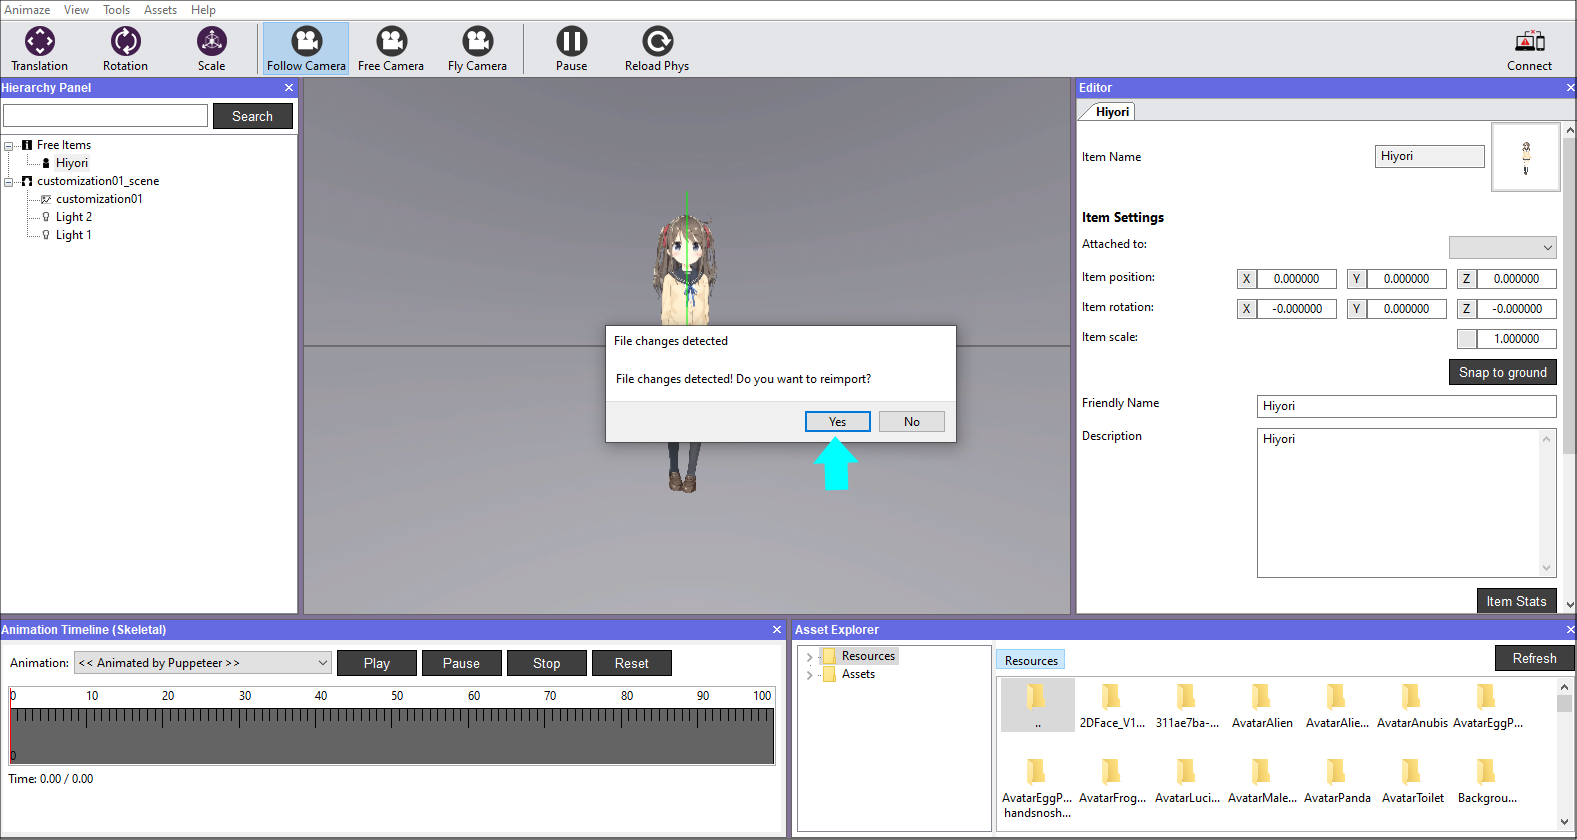  Animaze Editor will detect the changes made and will ask you to reimport. Click Yes